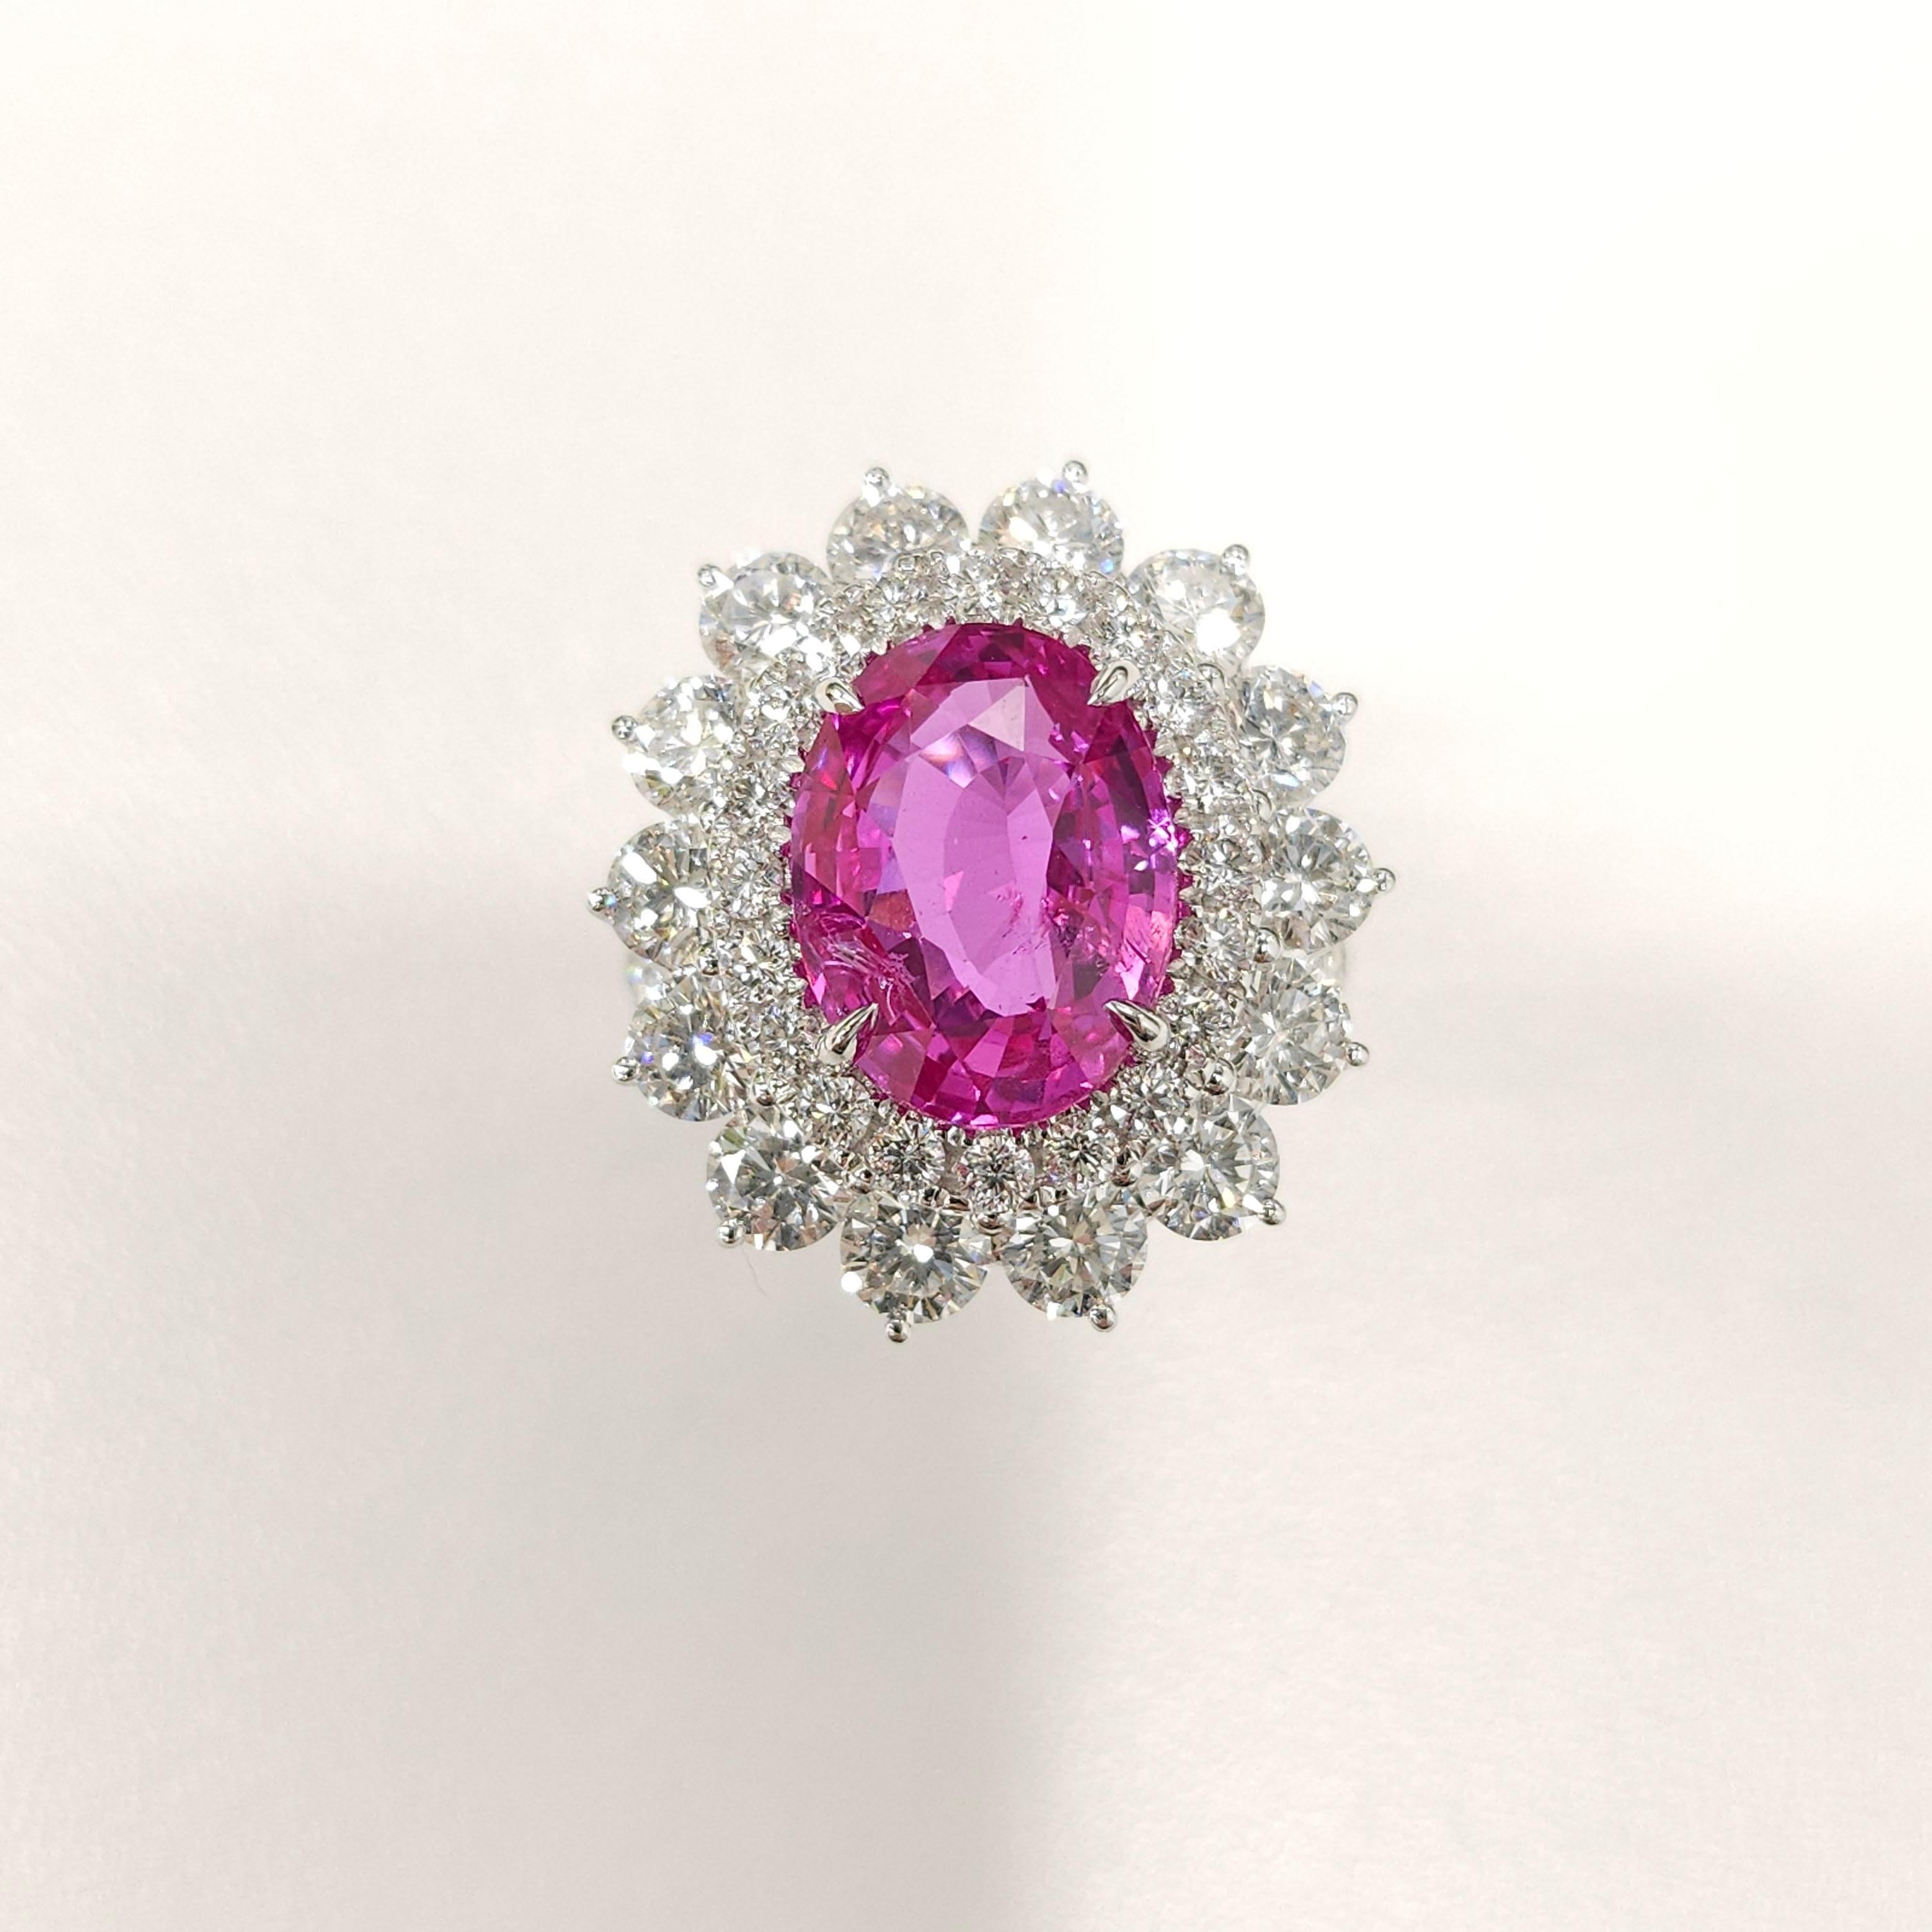 GRS Certified 5.81 Ct Pink Sapphire & 3.59 Ct Diamond Ring in 18K White Gold For Sale 8